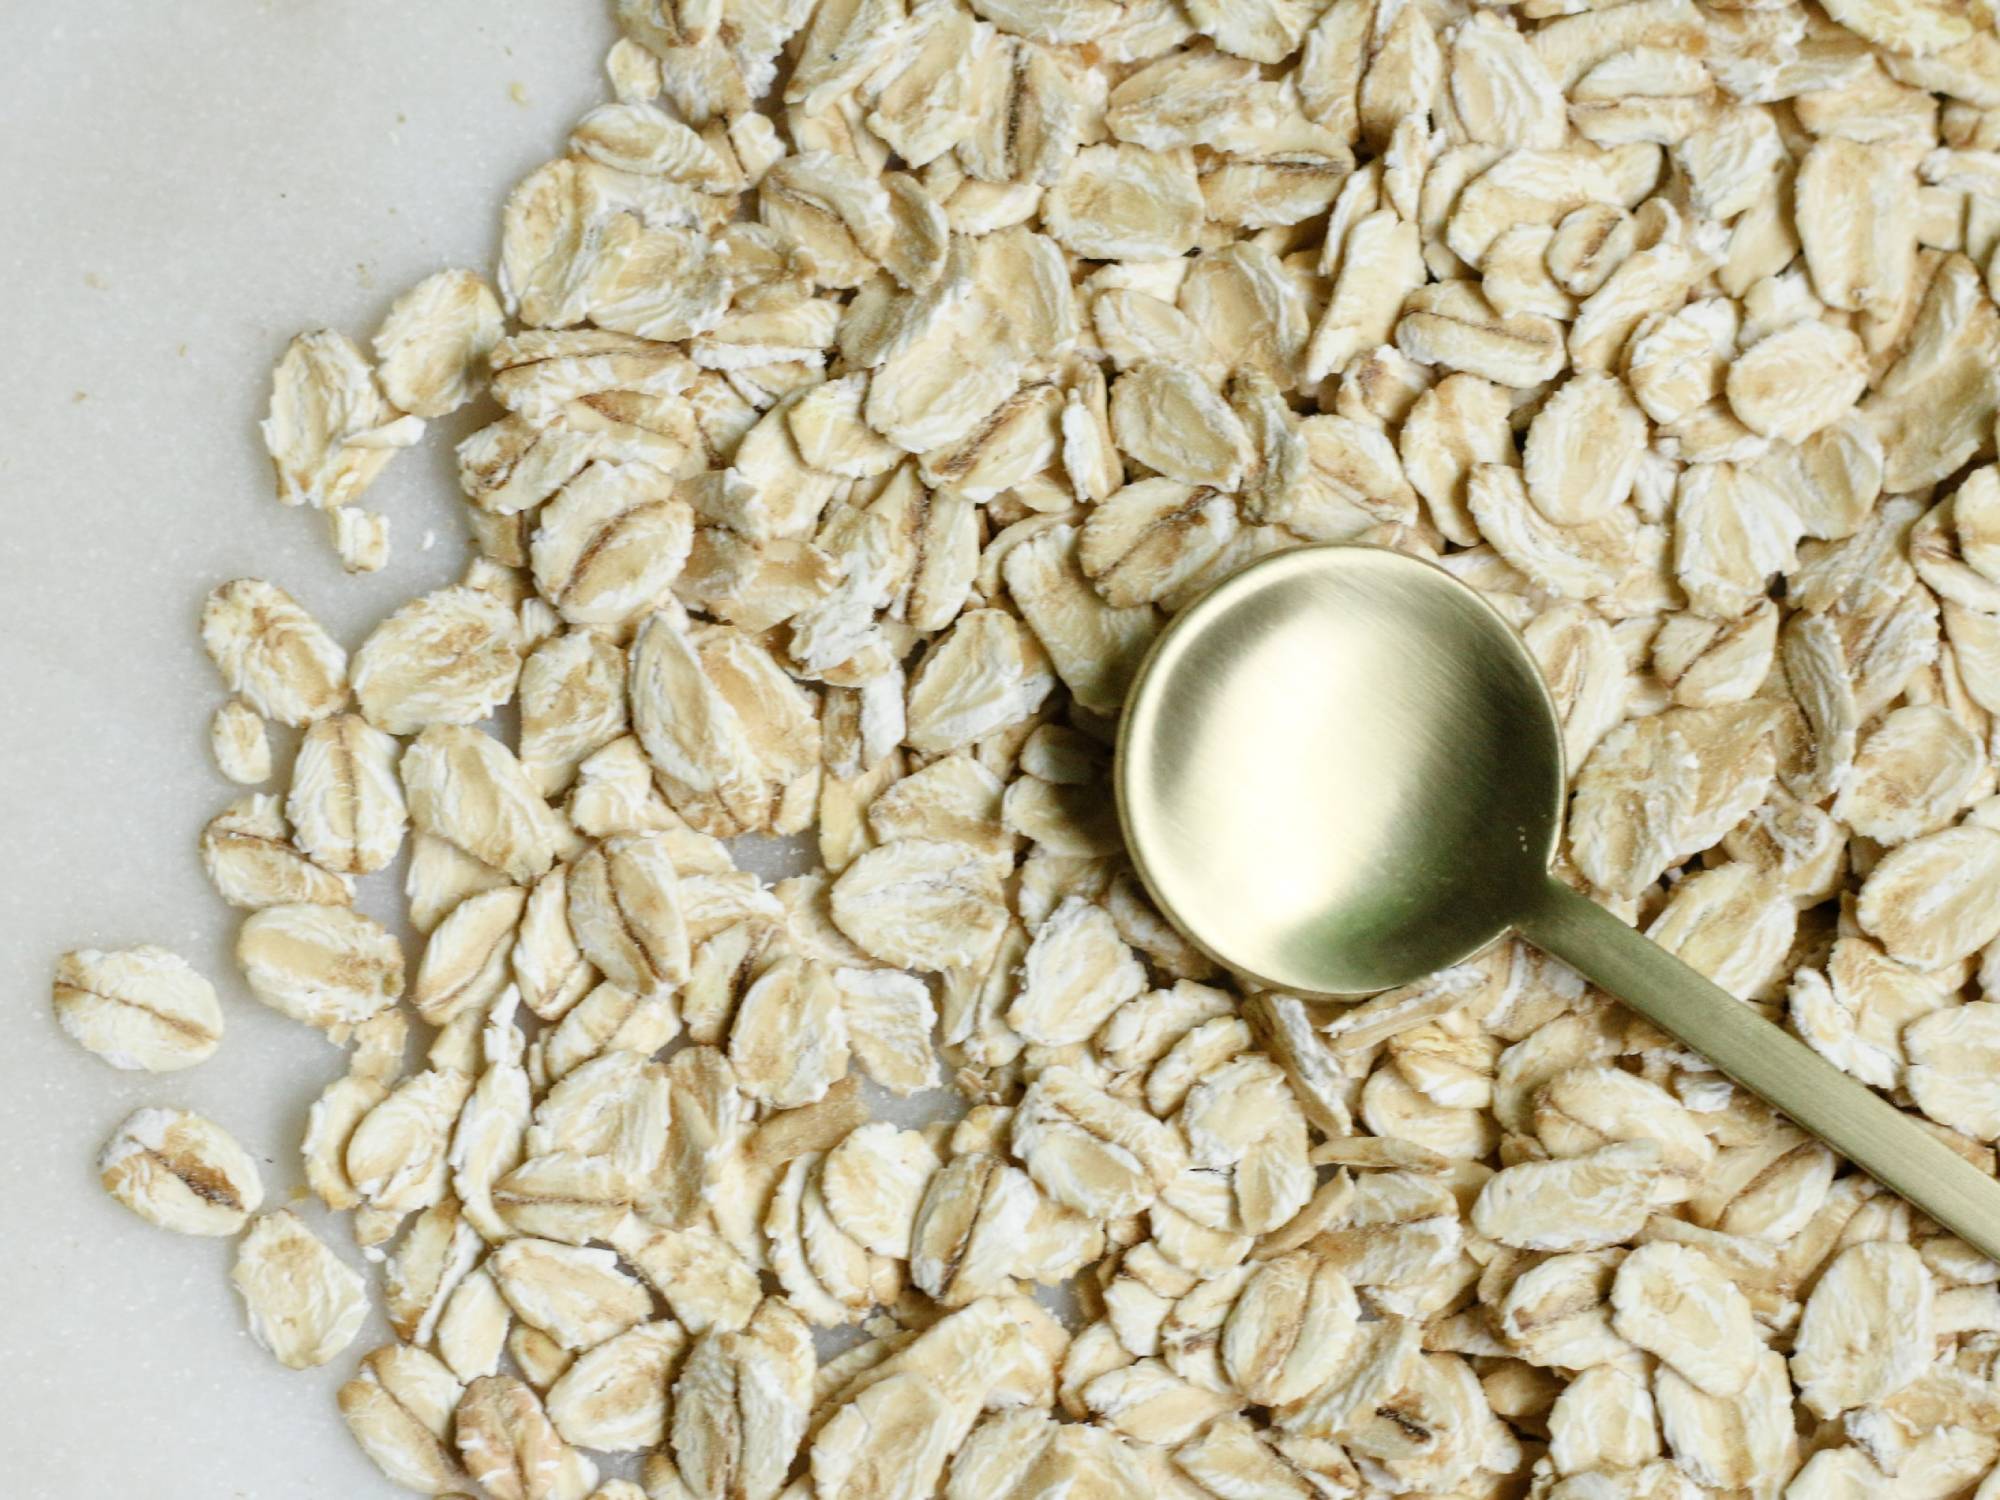 How to make oat milk—with science